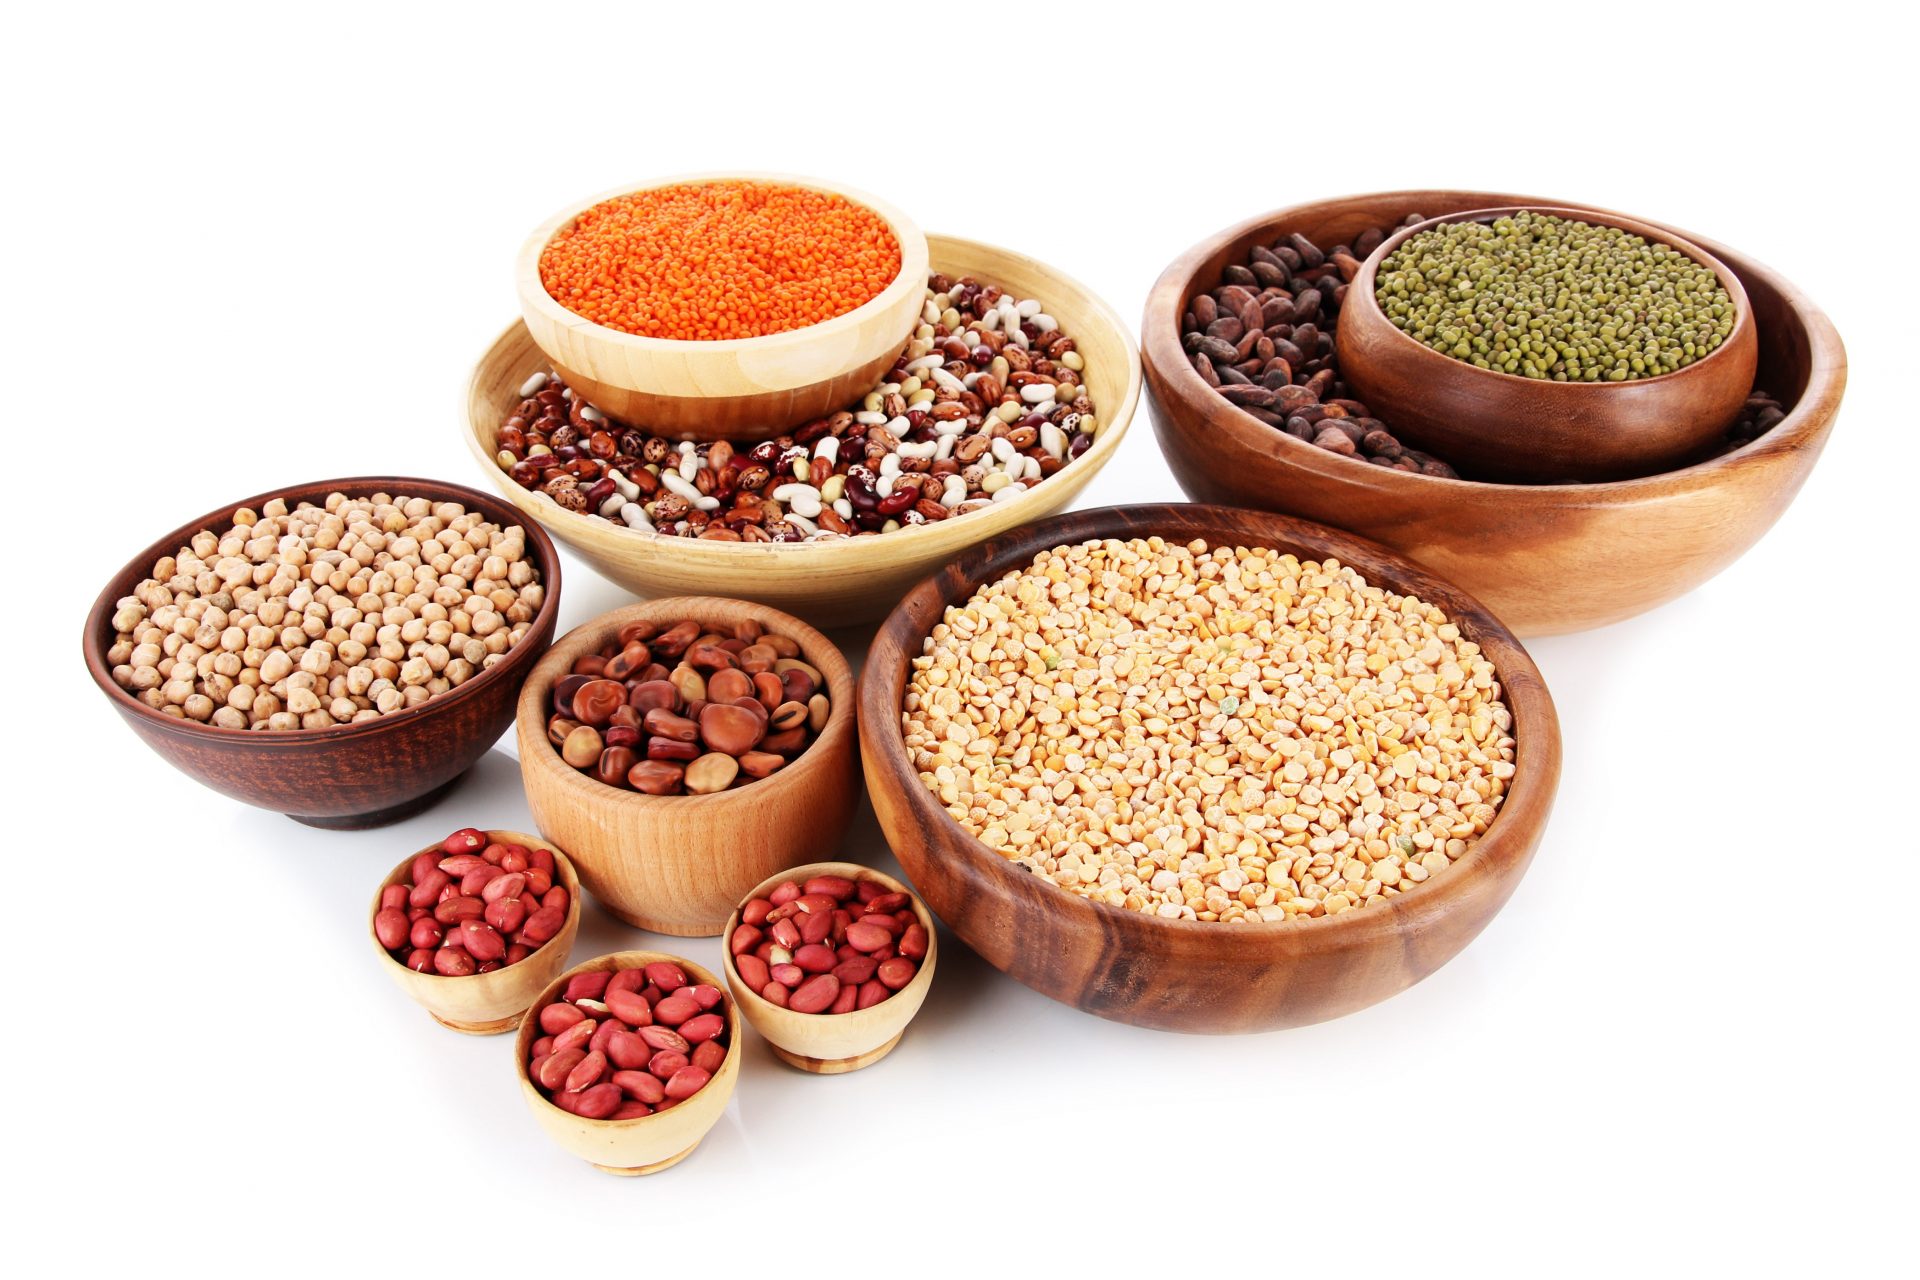 Bowls of legumes and seeds